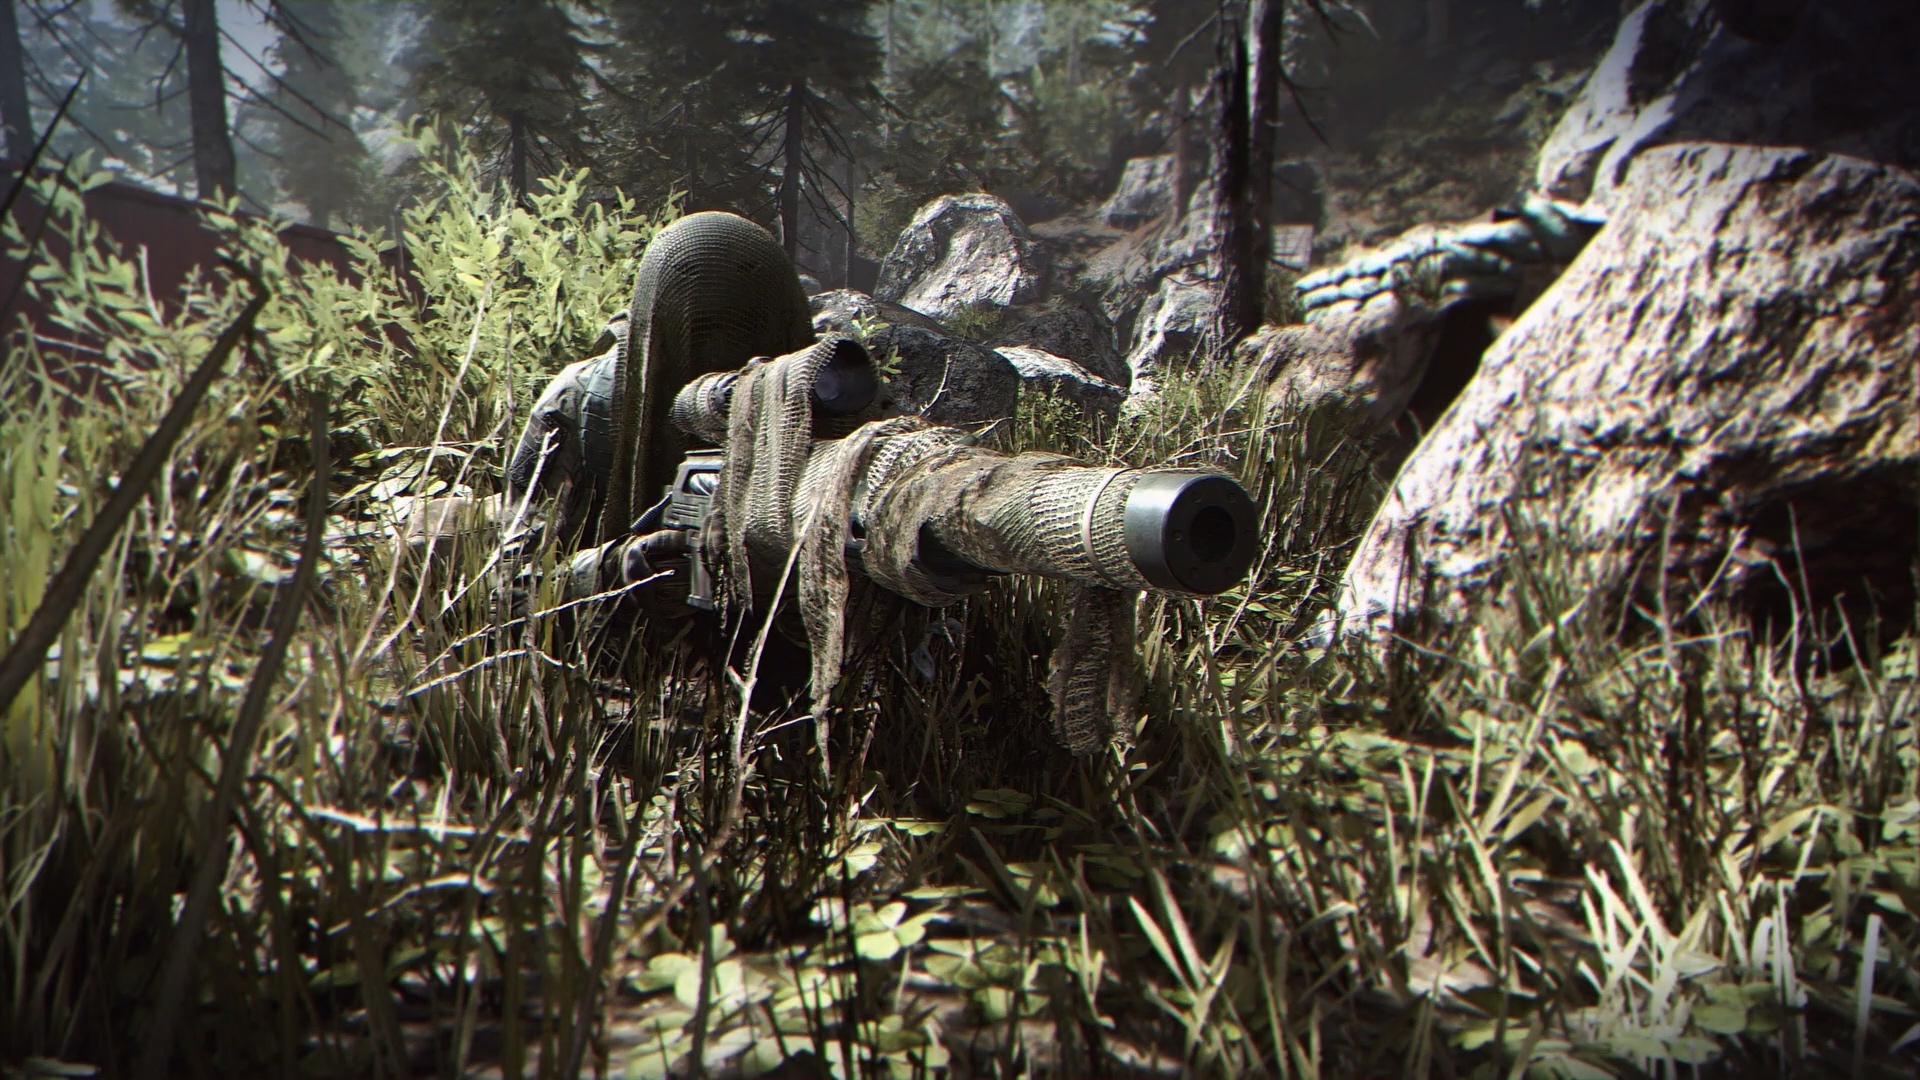 Call of Duty: Modern Warfare 2 (2022) Will Feature a New PvPvE Mode, New Warzone Map, and More